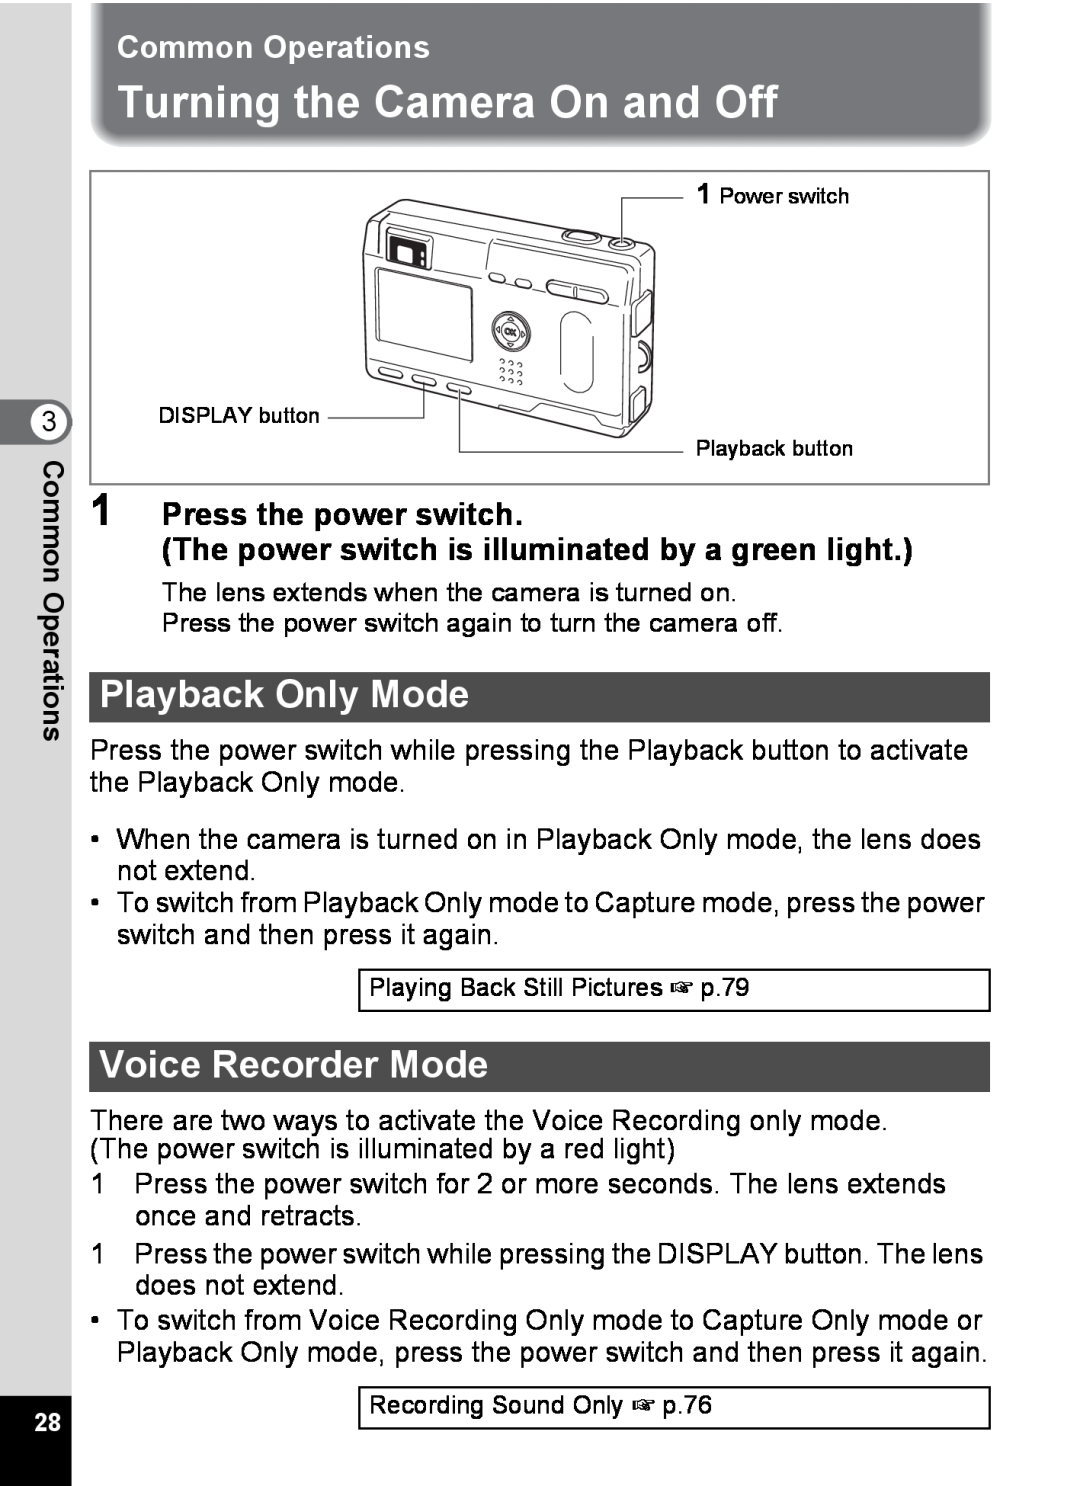 Pentax S4 manual Turning the Camera On and Off, Playback Only Mode, Voice Recorder Mode, Common Operations 